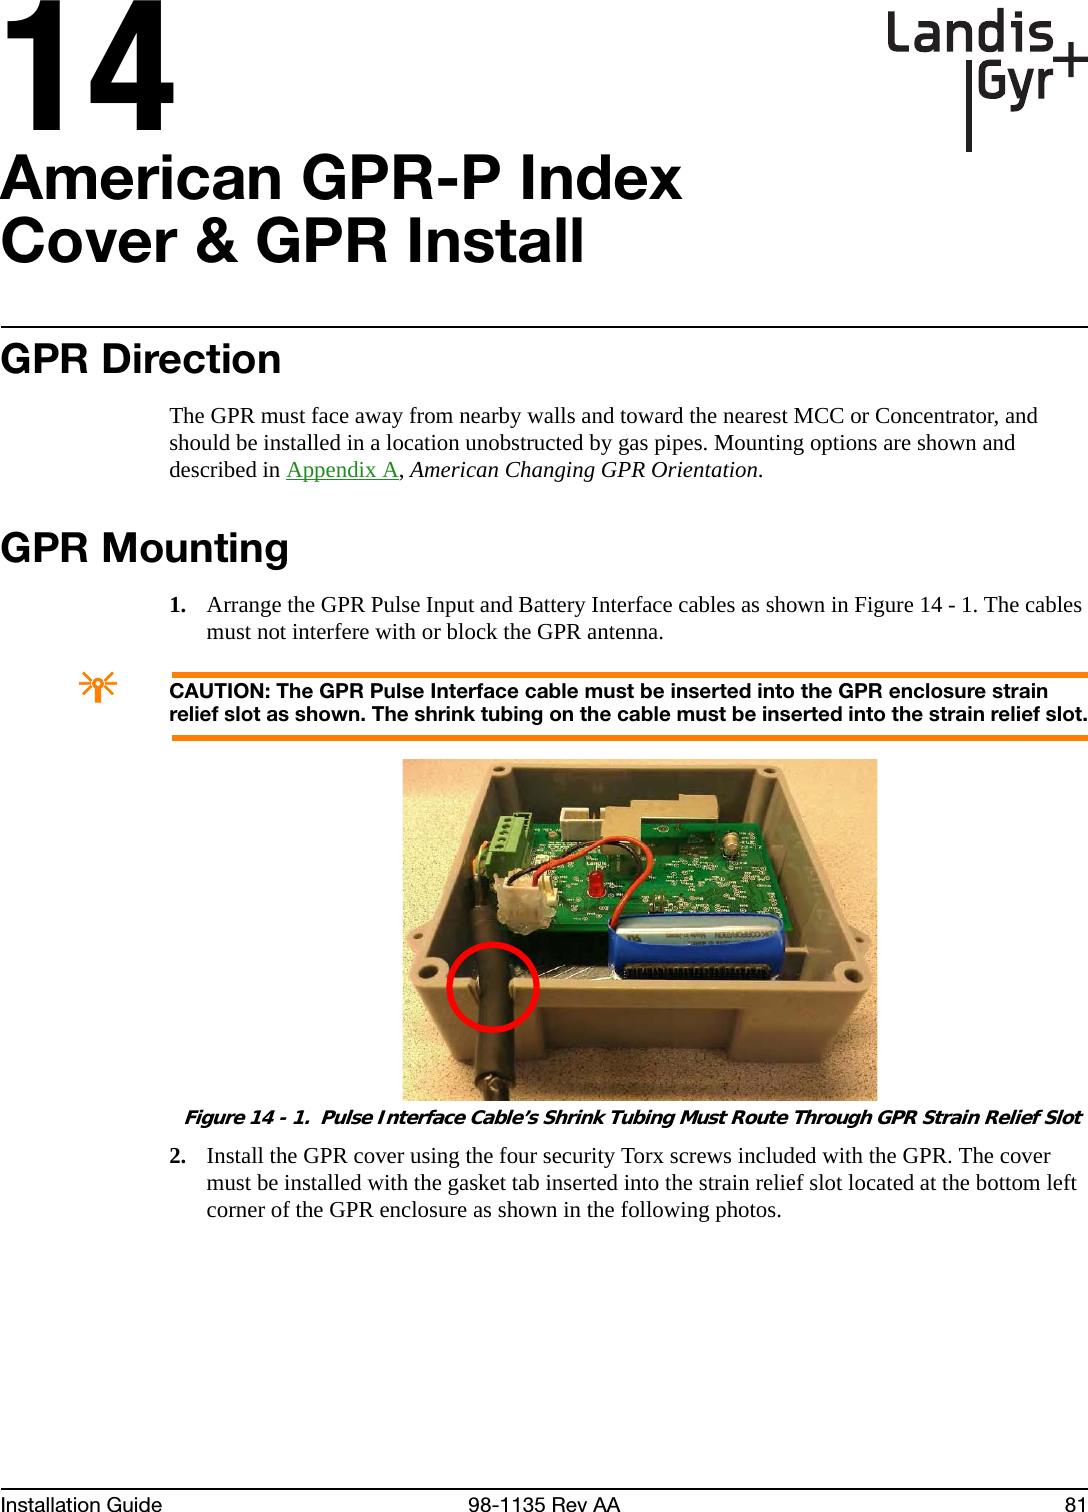 14Installation Guide 98-1135 Rev AA 81American GPR-P Index Cover &amp; GPR InstallGPR DirectionThe GPR must face away from nearby walls and toward the nearest MCC or Concentrator, and should be installed in a location unobstructed by gas pipes. Mounting options are shown and described in Appendix A, American Changing GPR Orientation.GPR Mounting1. Arrange the GPR Pulse Input and Battery Interface cables as shown in Figure 14 - 1. The cables must not interfere with or block the GPR antenna.ACAUTION: The GPR Pulse Interface cable must be inserted into the GPR enclosure strain relief slot as shown. The shrink tubing on the cable must be inserted into the strain relief slot. Figure 14 - 1.  Pulse Interface Cable’s Shrink Tubing Must Route Through GPR Strain Relief Slot2. Install the GPR cover using the four security Torx screws included with the GPR. The cover must be installed with the gasket tab inserted into the strain relief slot located at the bottom left corner of the GPR enclosure as shown in the following photos.